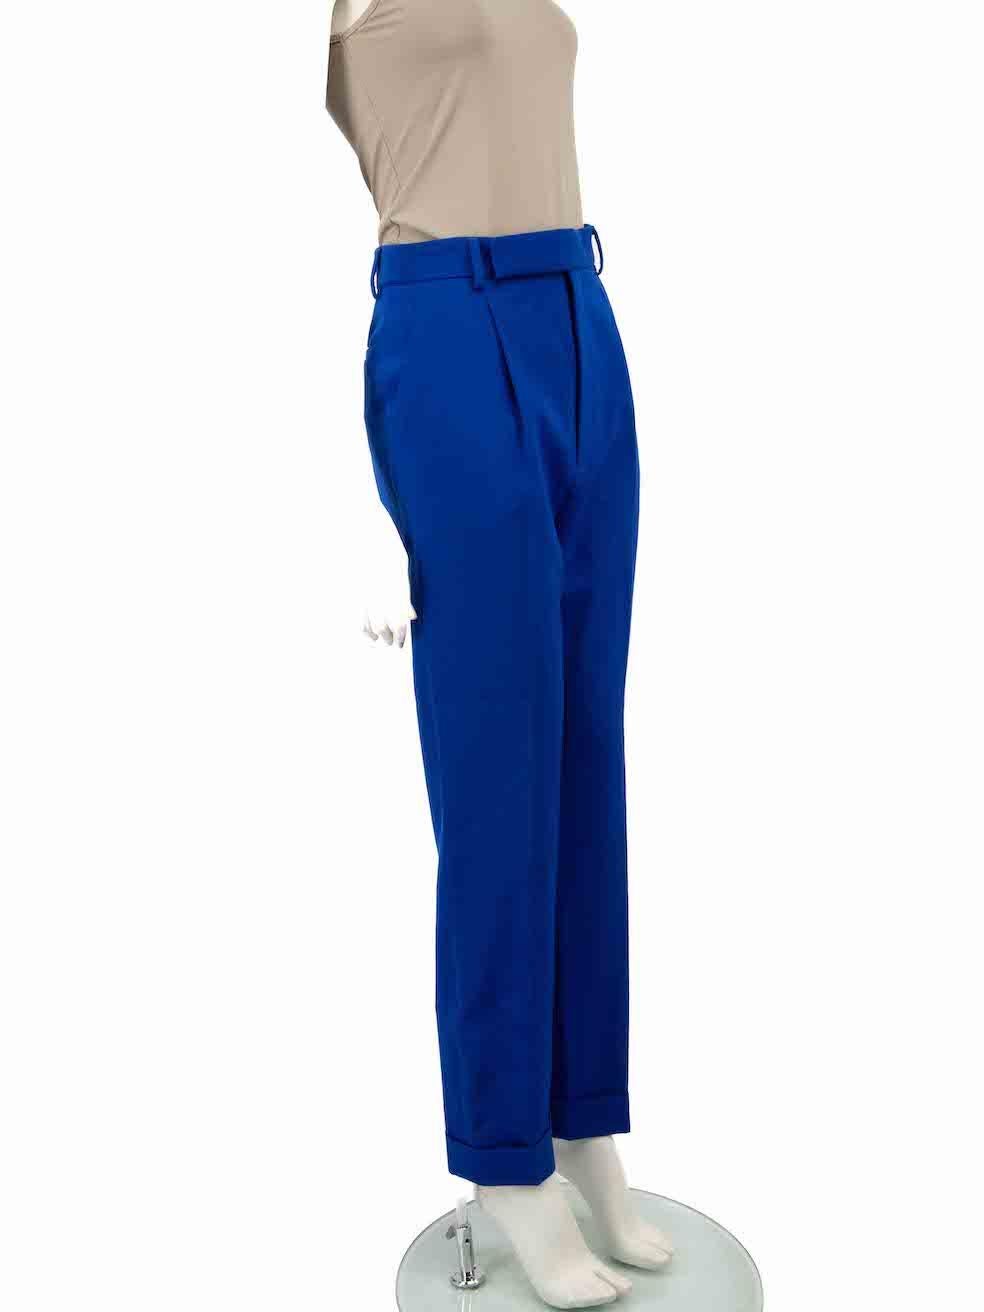 CONDITION is Very good. Minimal wear to trouser is evident. Minimal wear to internal front button that is slightly loose on this used Saint Laurent designer resale item.
 
 
 
 Details
 
 
 Blue
 
 Wool
 
 Trousers
 
 Slim fit
 
 Mid rise
 
 2x Side